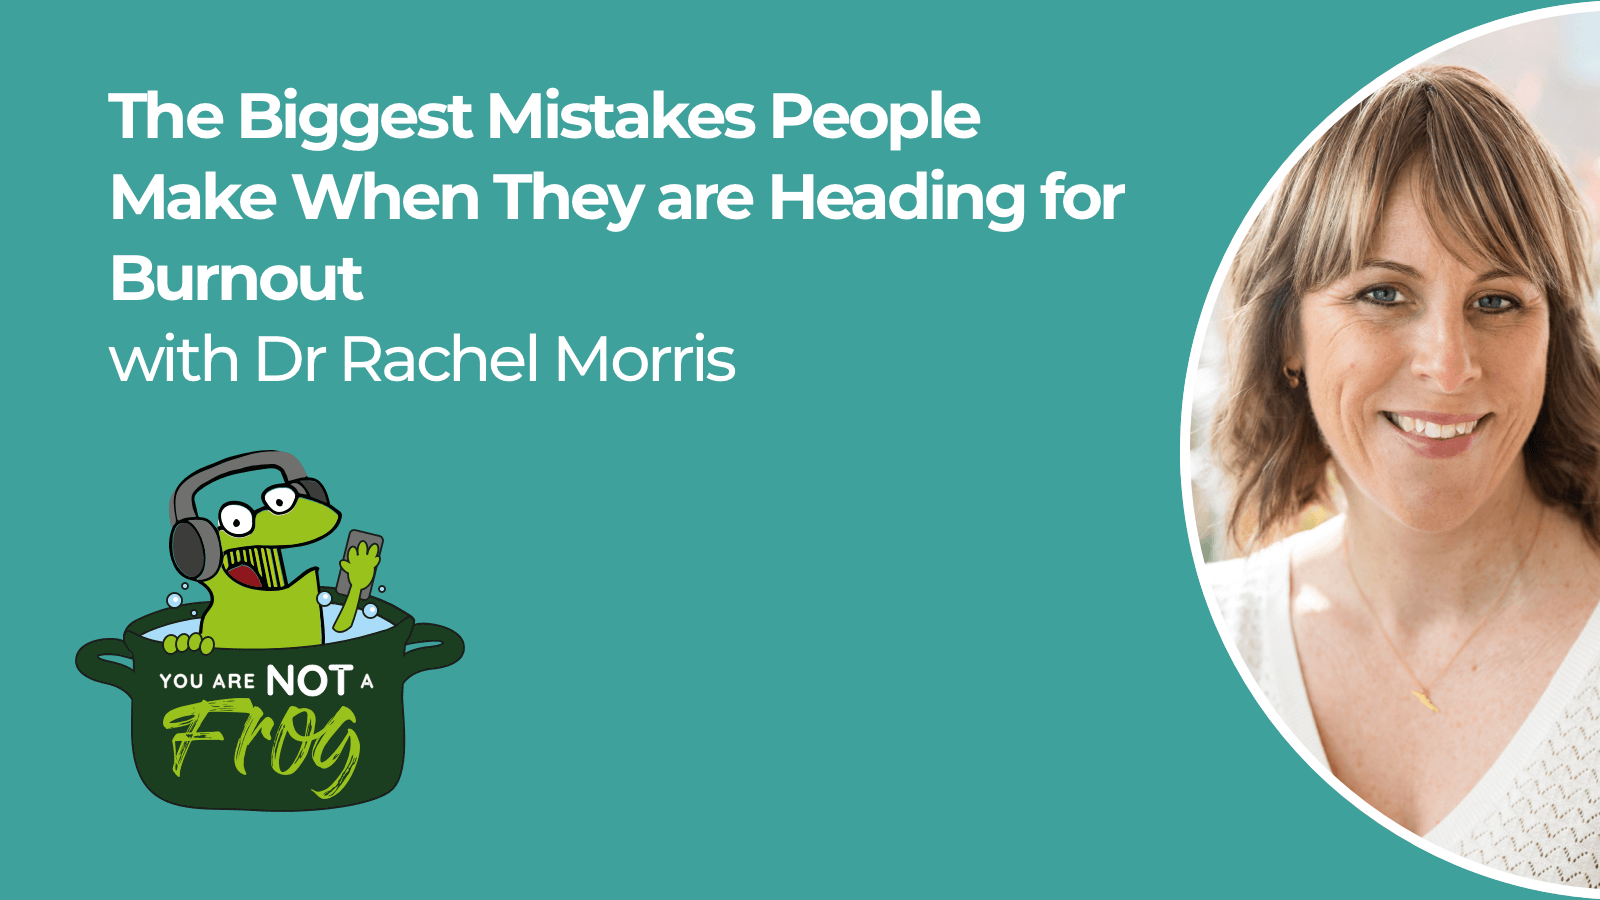 The Biggest Mistakes People Make When They are Heading for Burnout